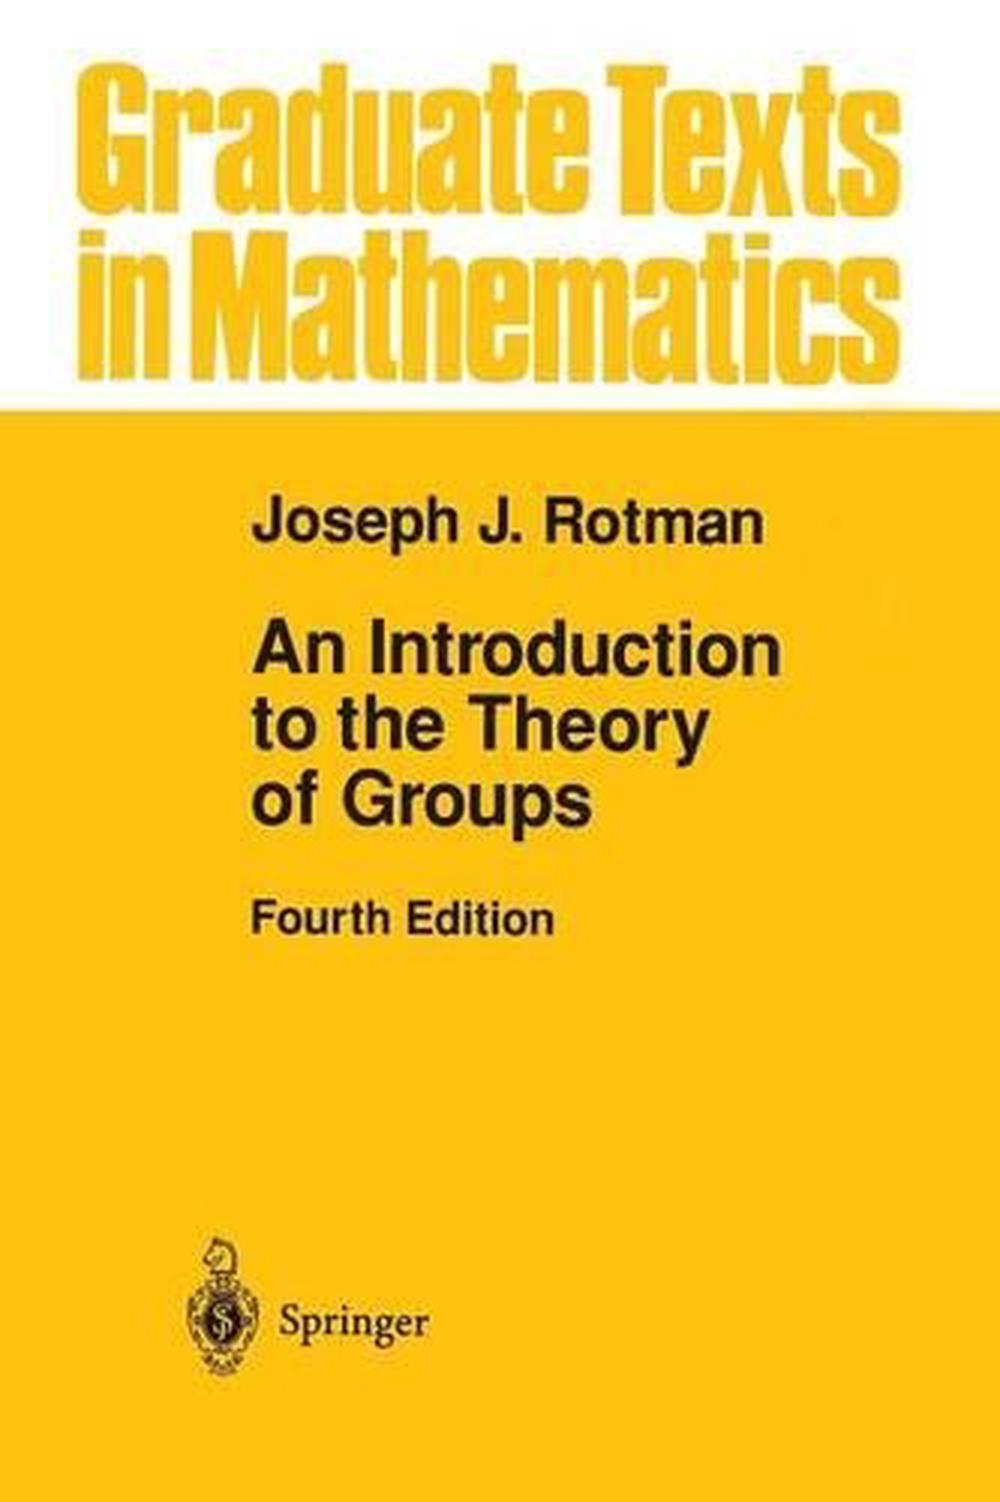 An Introduction to the Theory of Groups by Joseph J. Rotman (English) Hardcover 9781461286868 eBay